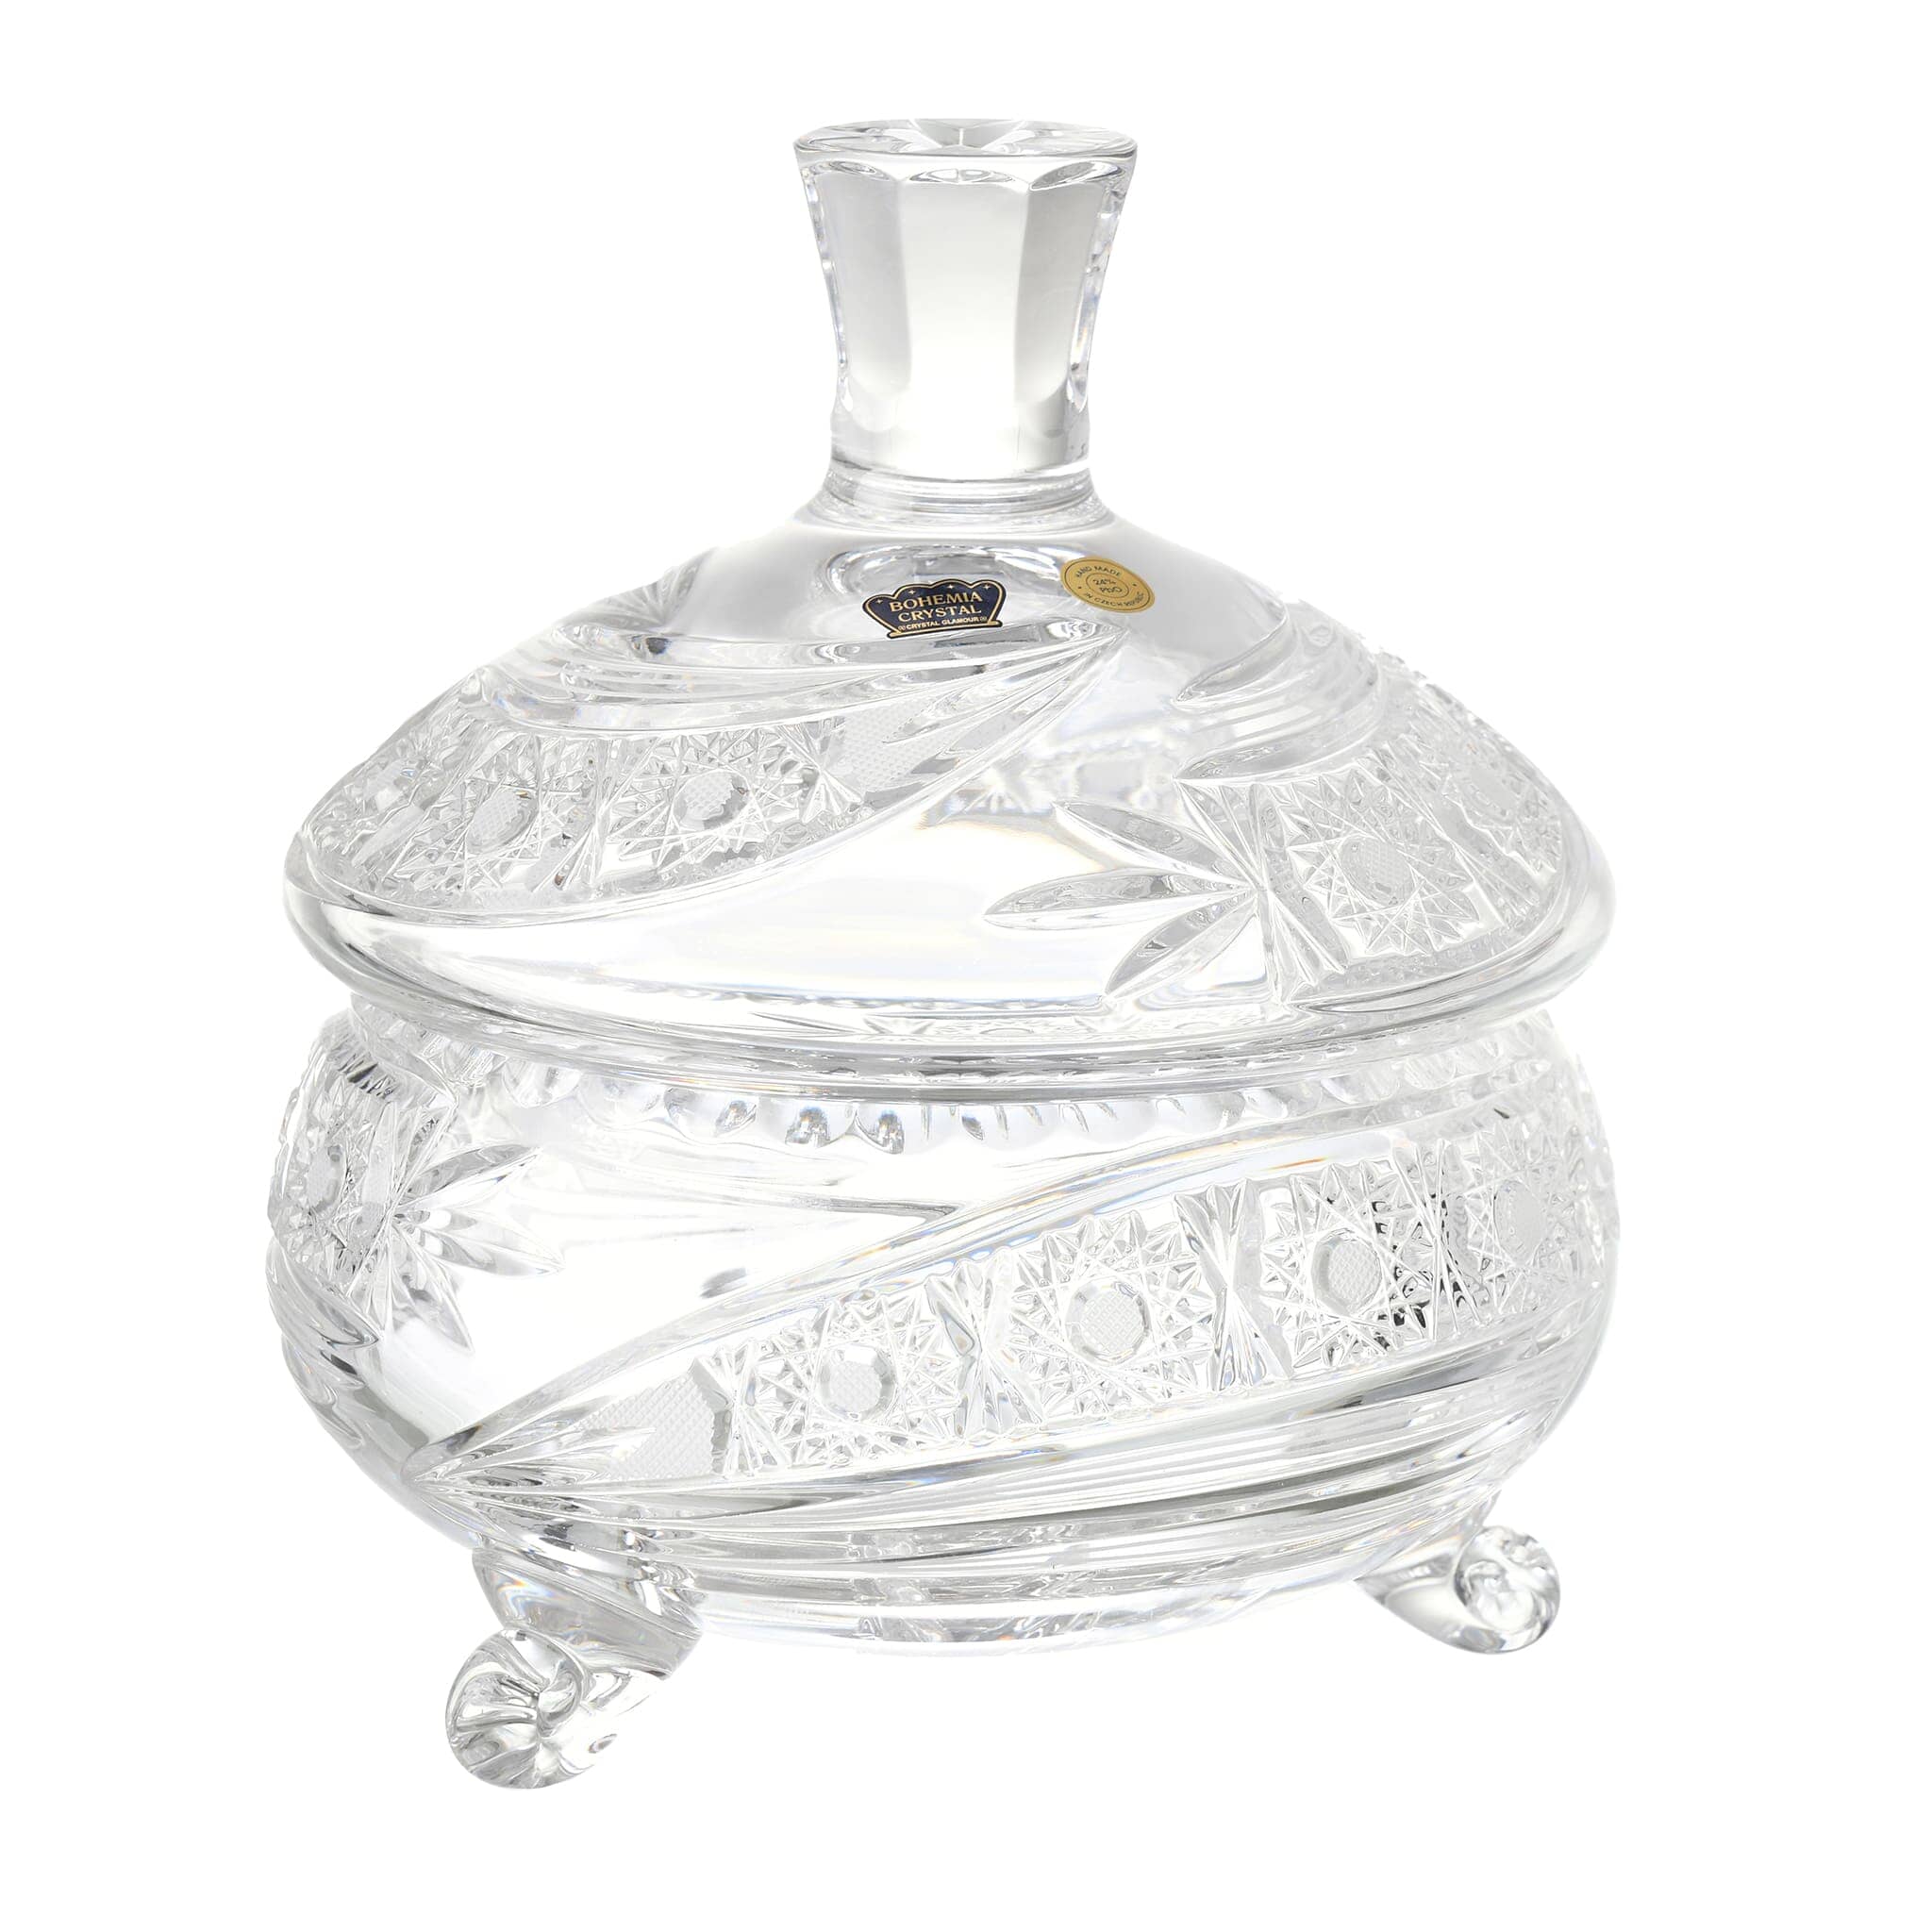 Bohemia Crystal - Crystal Box With Cover & 3 Legs - 270009231